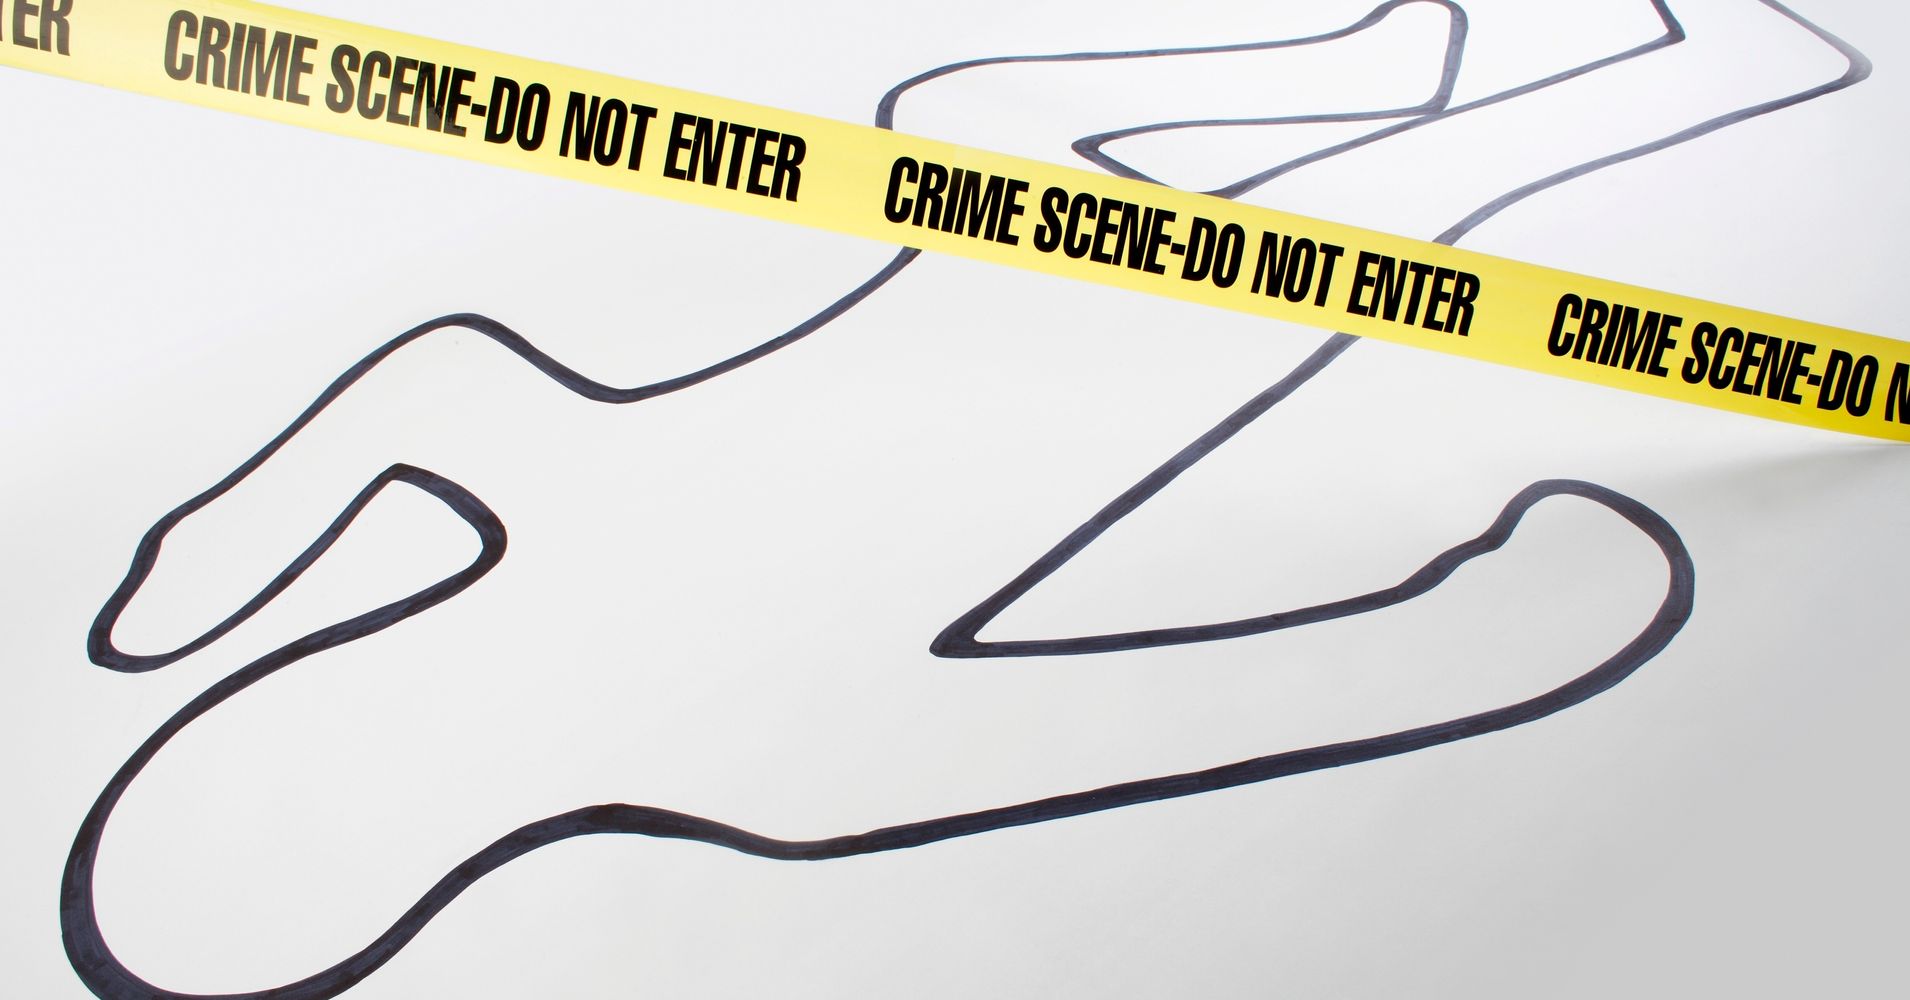 6 Insanely Complicated Murder Plots (That Actually Happened) | HuffPost